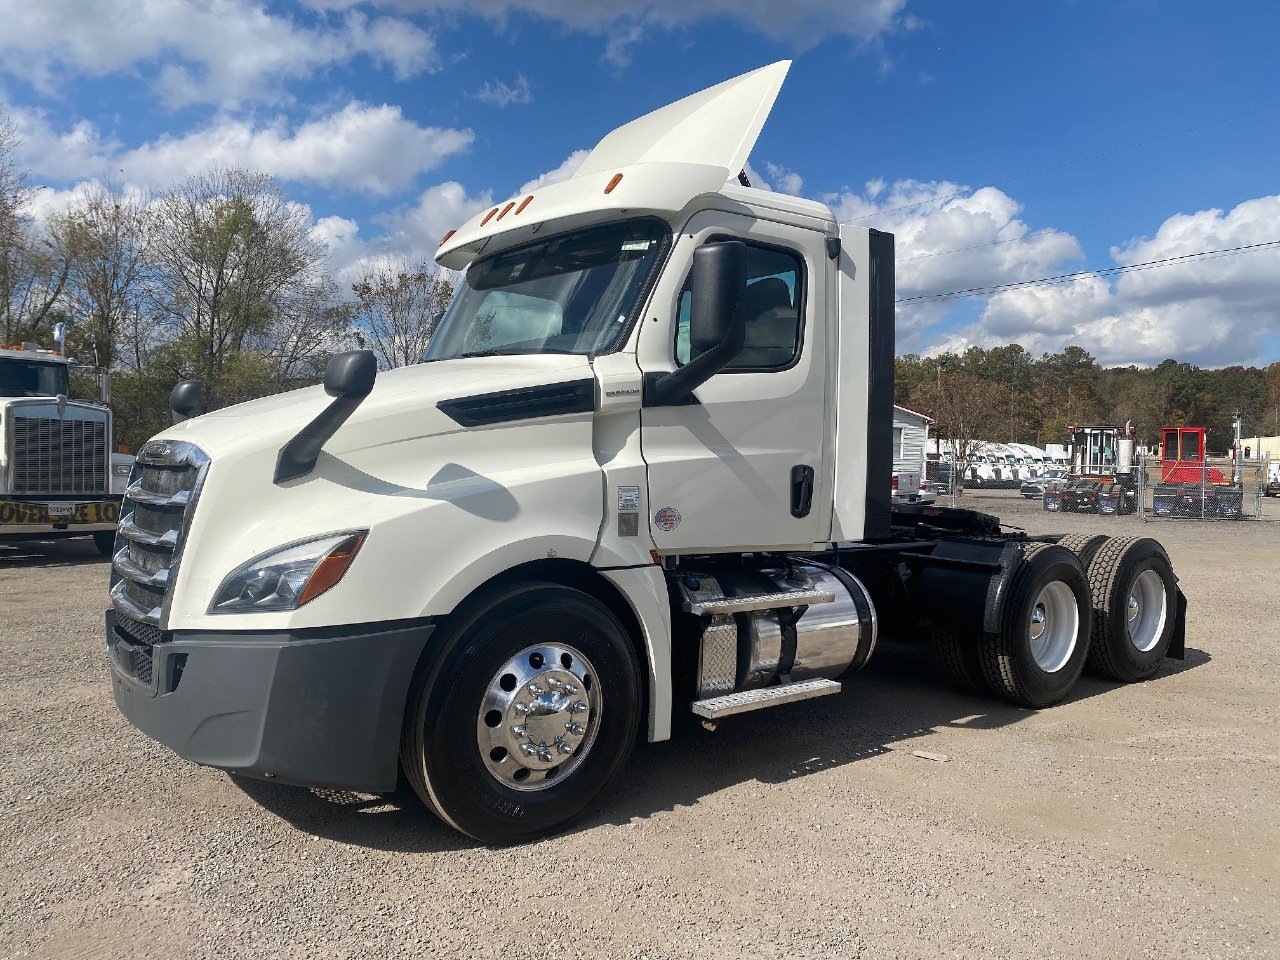 USED 2018 FREIGHTLINER CASCADIA TANDEM AXLE DAYCAB TRUCK #15115